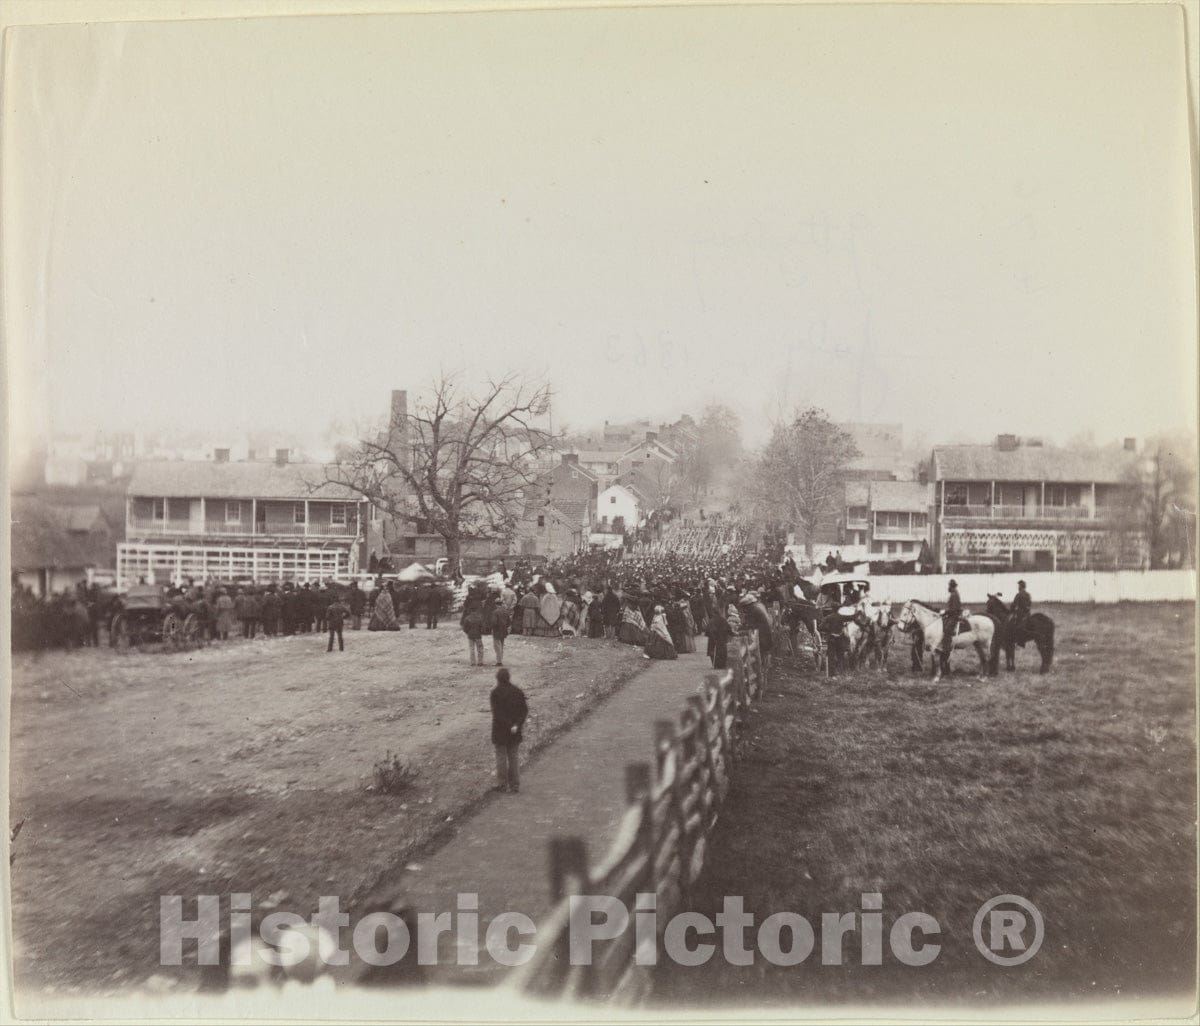 Photo Print : Procession of Troops and Civilians, Dedication of Soldiers' National Cemetery, Gettysburg, Pennsylvania - Tyson - 1863 : Vintage Wall Art